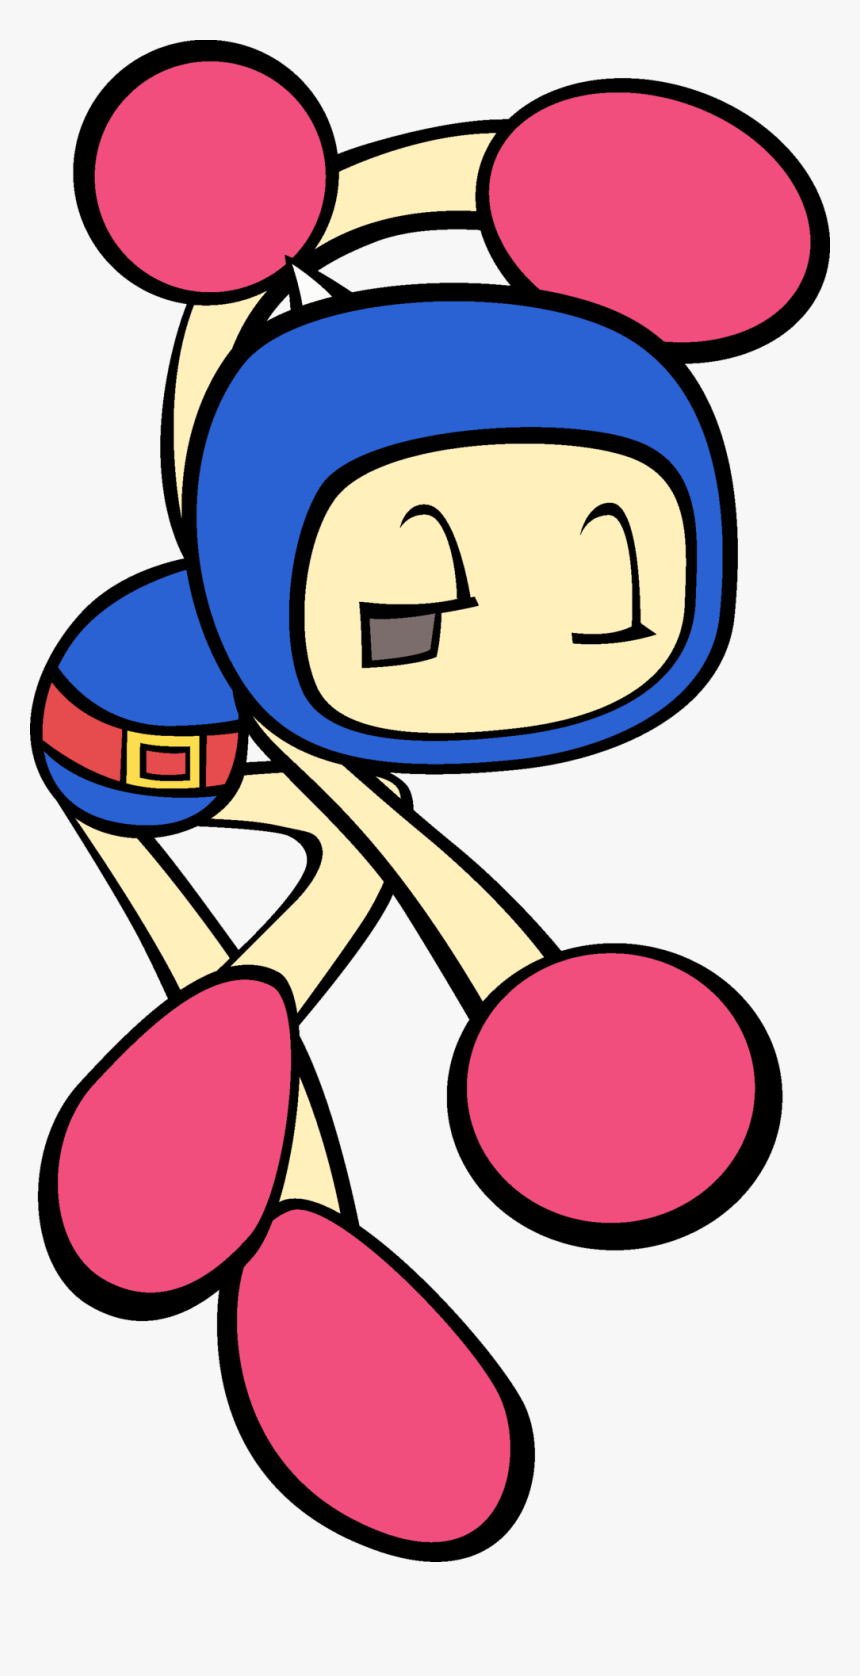 Super Bomberman R The Sailorbomber Ⓒ - Bomberman R Blue Bomber, HD Png Download, Free Download